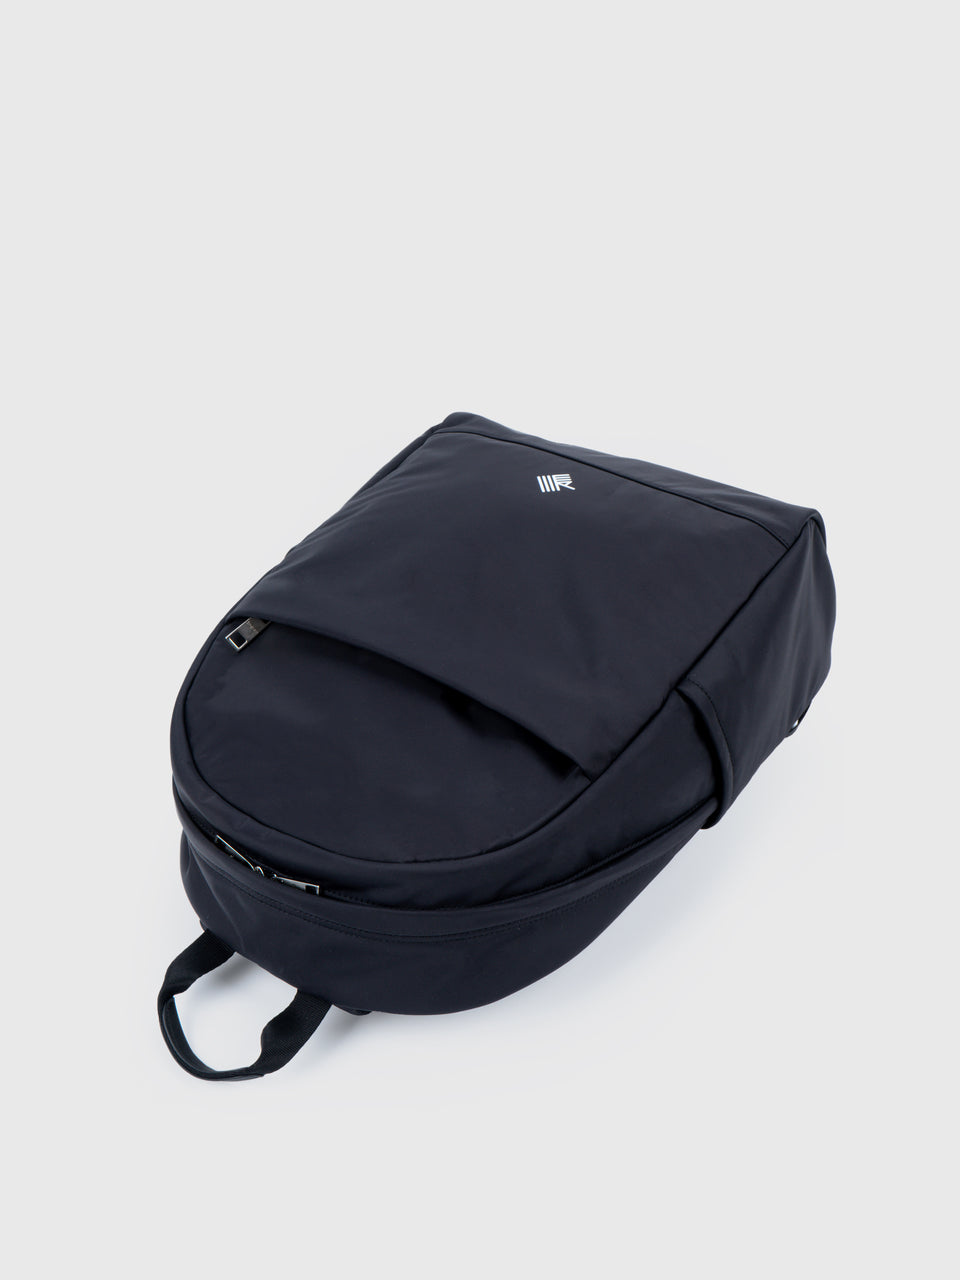 City Round Backpack - Charcoal Black